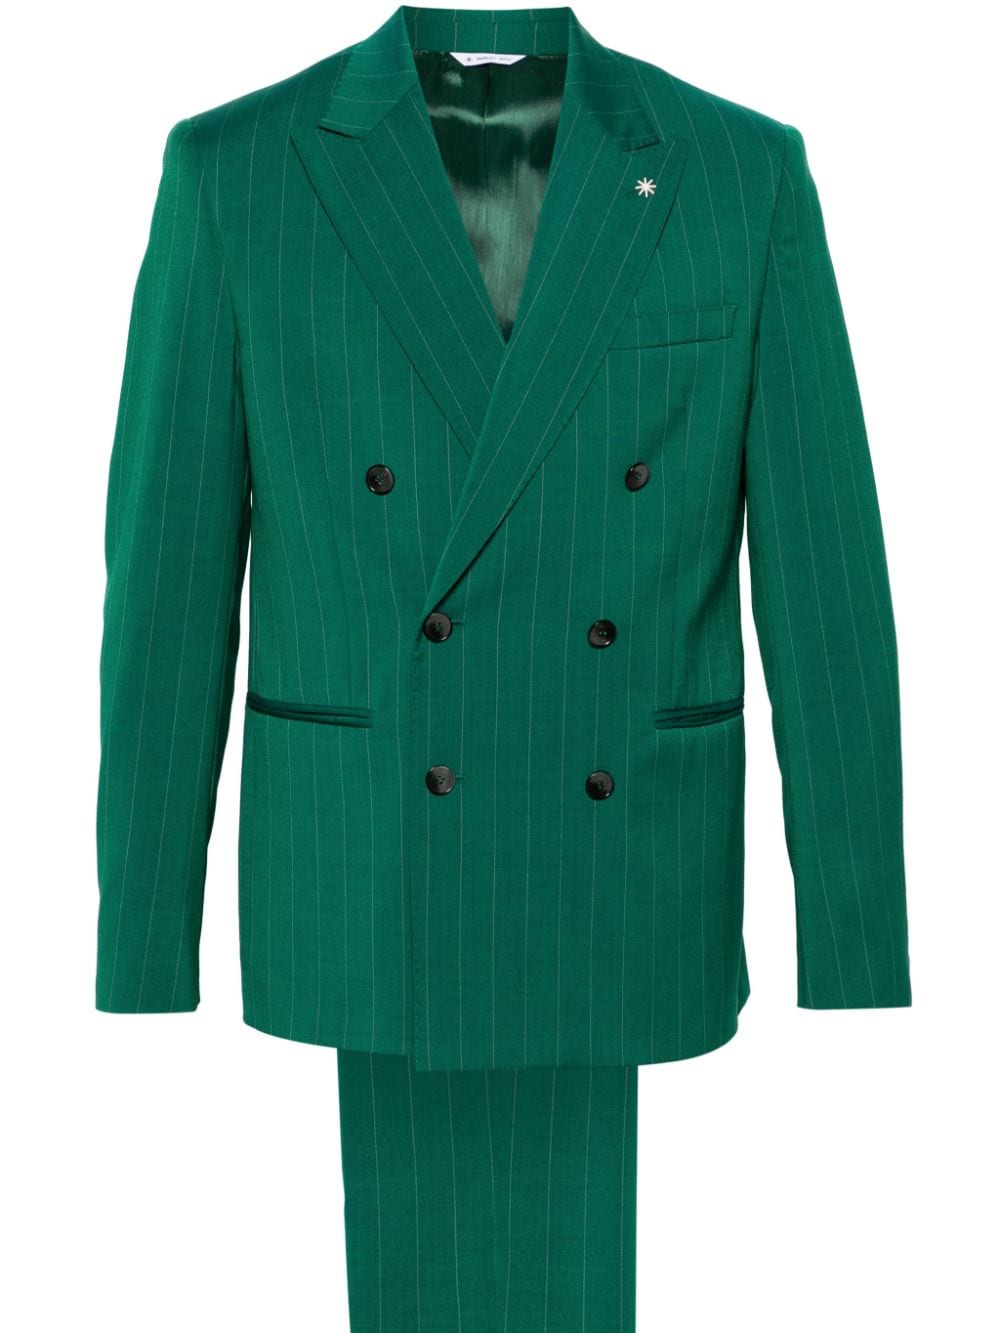 Green double-breasted pinstripe suit